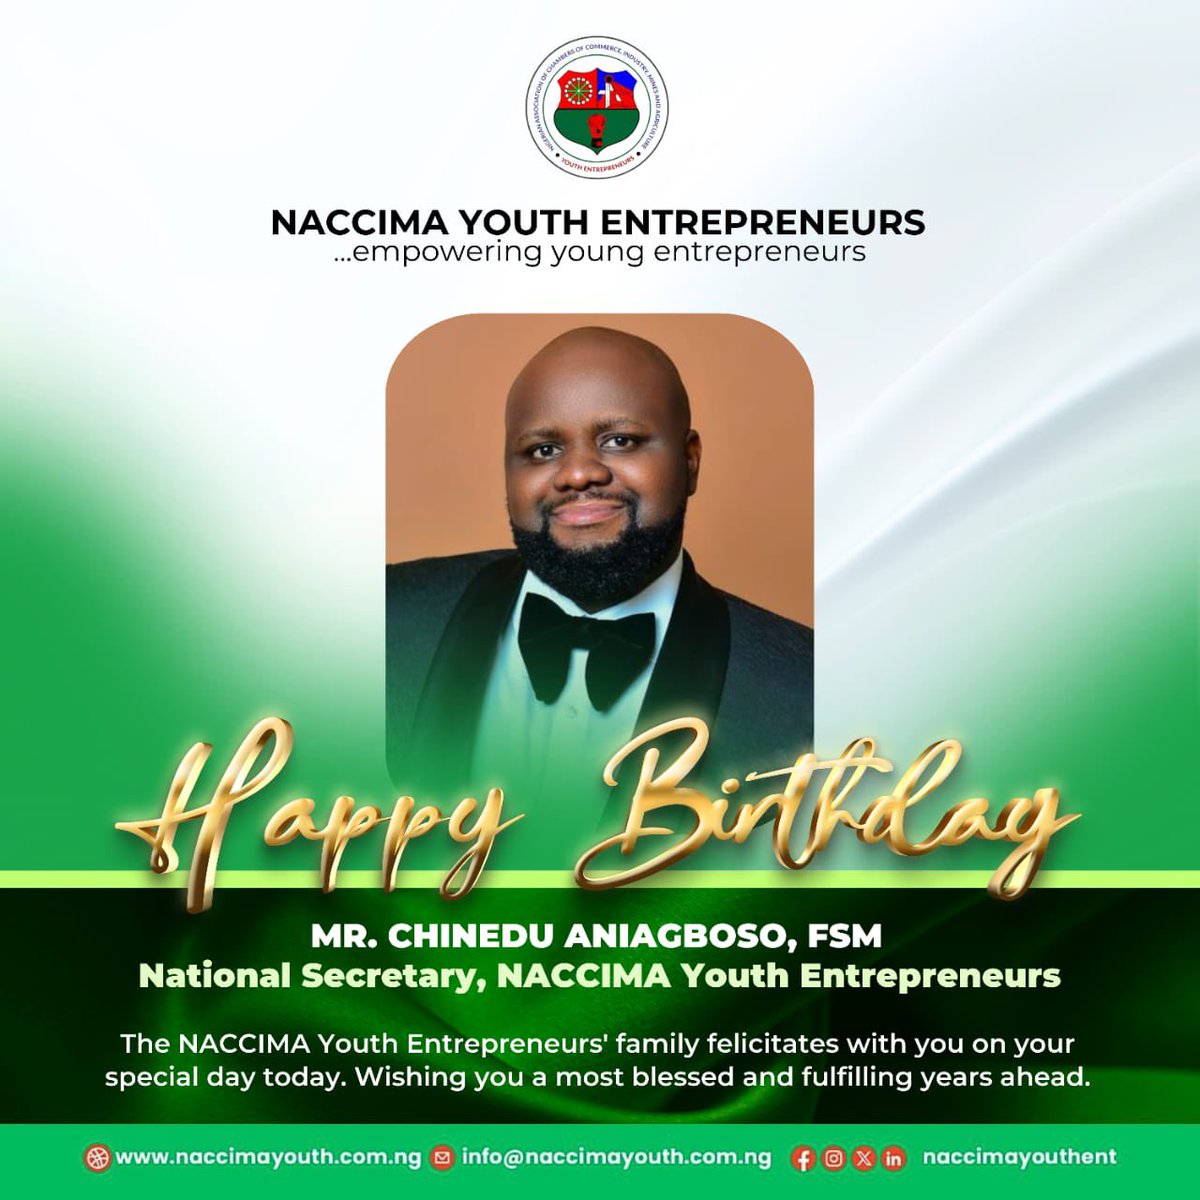 On behalf of the National Coordinator of NACCIMA Youth Entrepreneurs, Engr. Segun Bolaji and all members, we extend our warmest wishes for a day filled with joy and celebration.